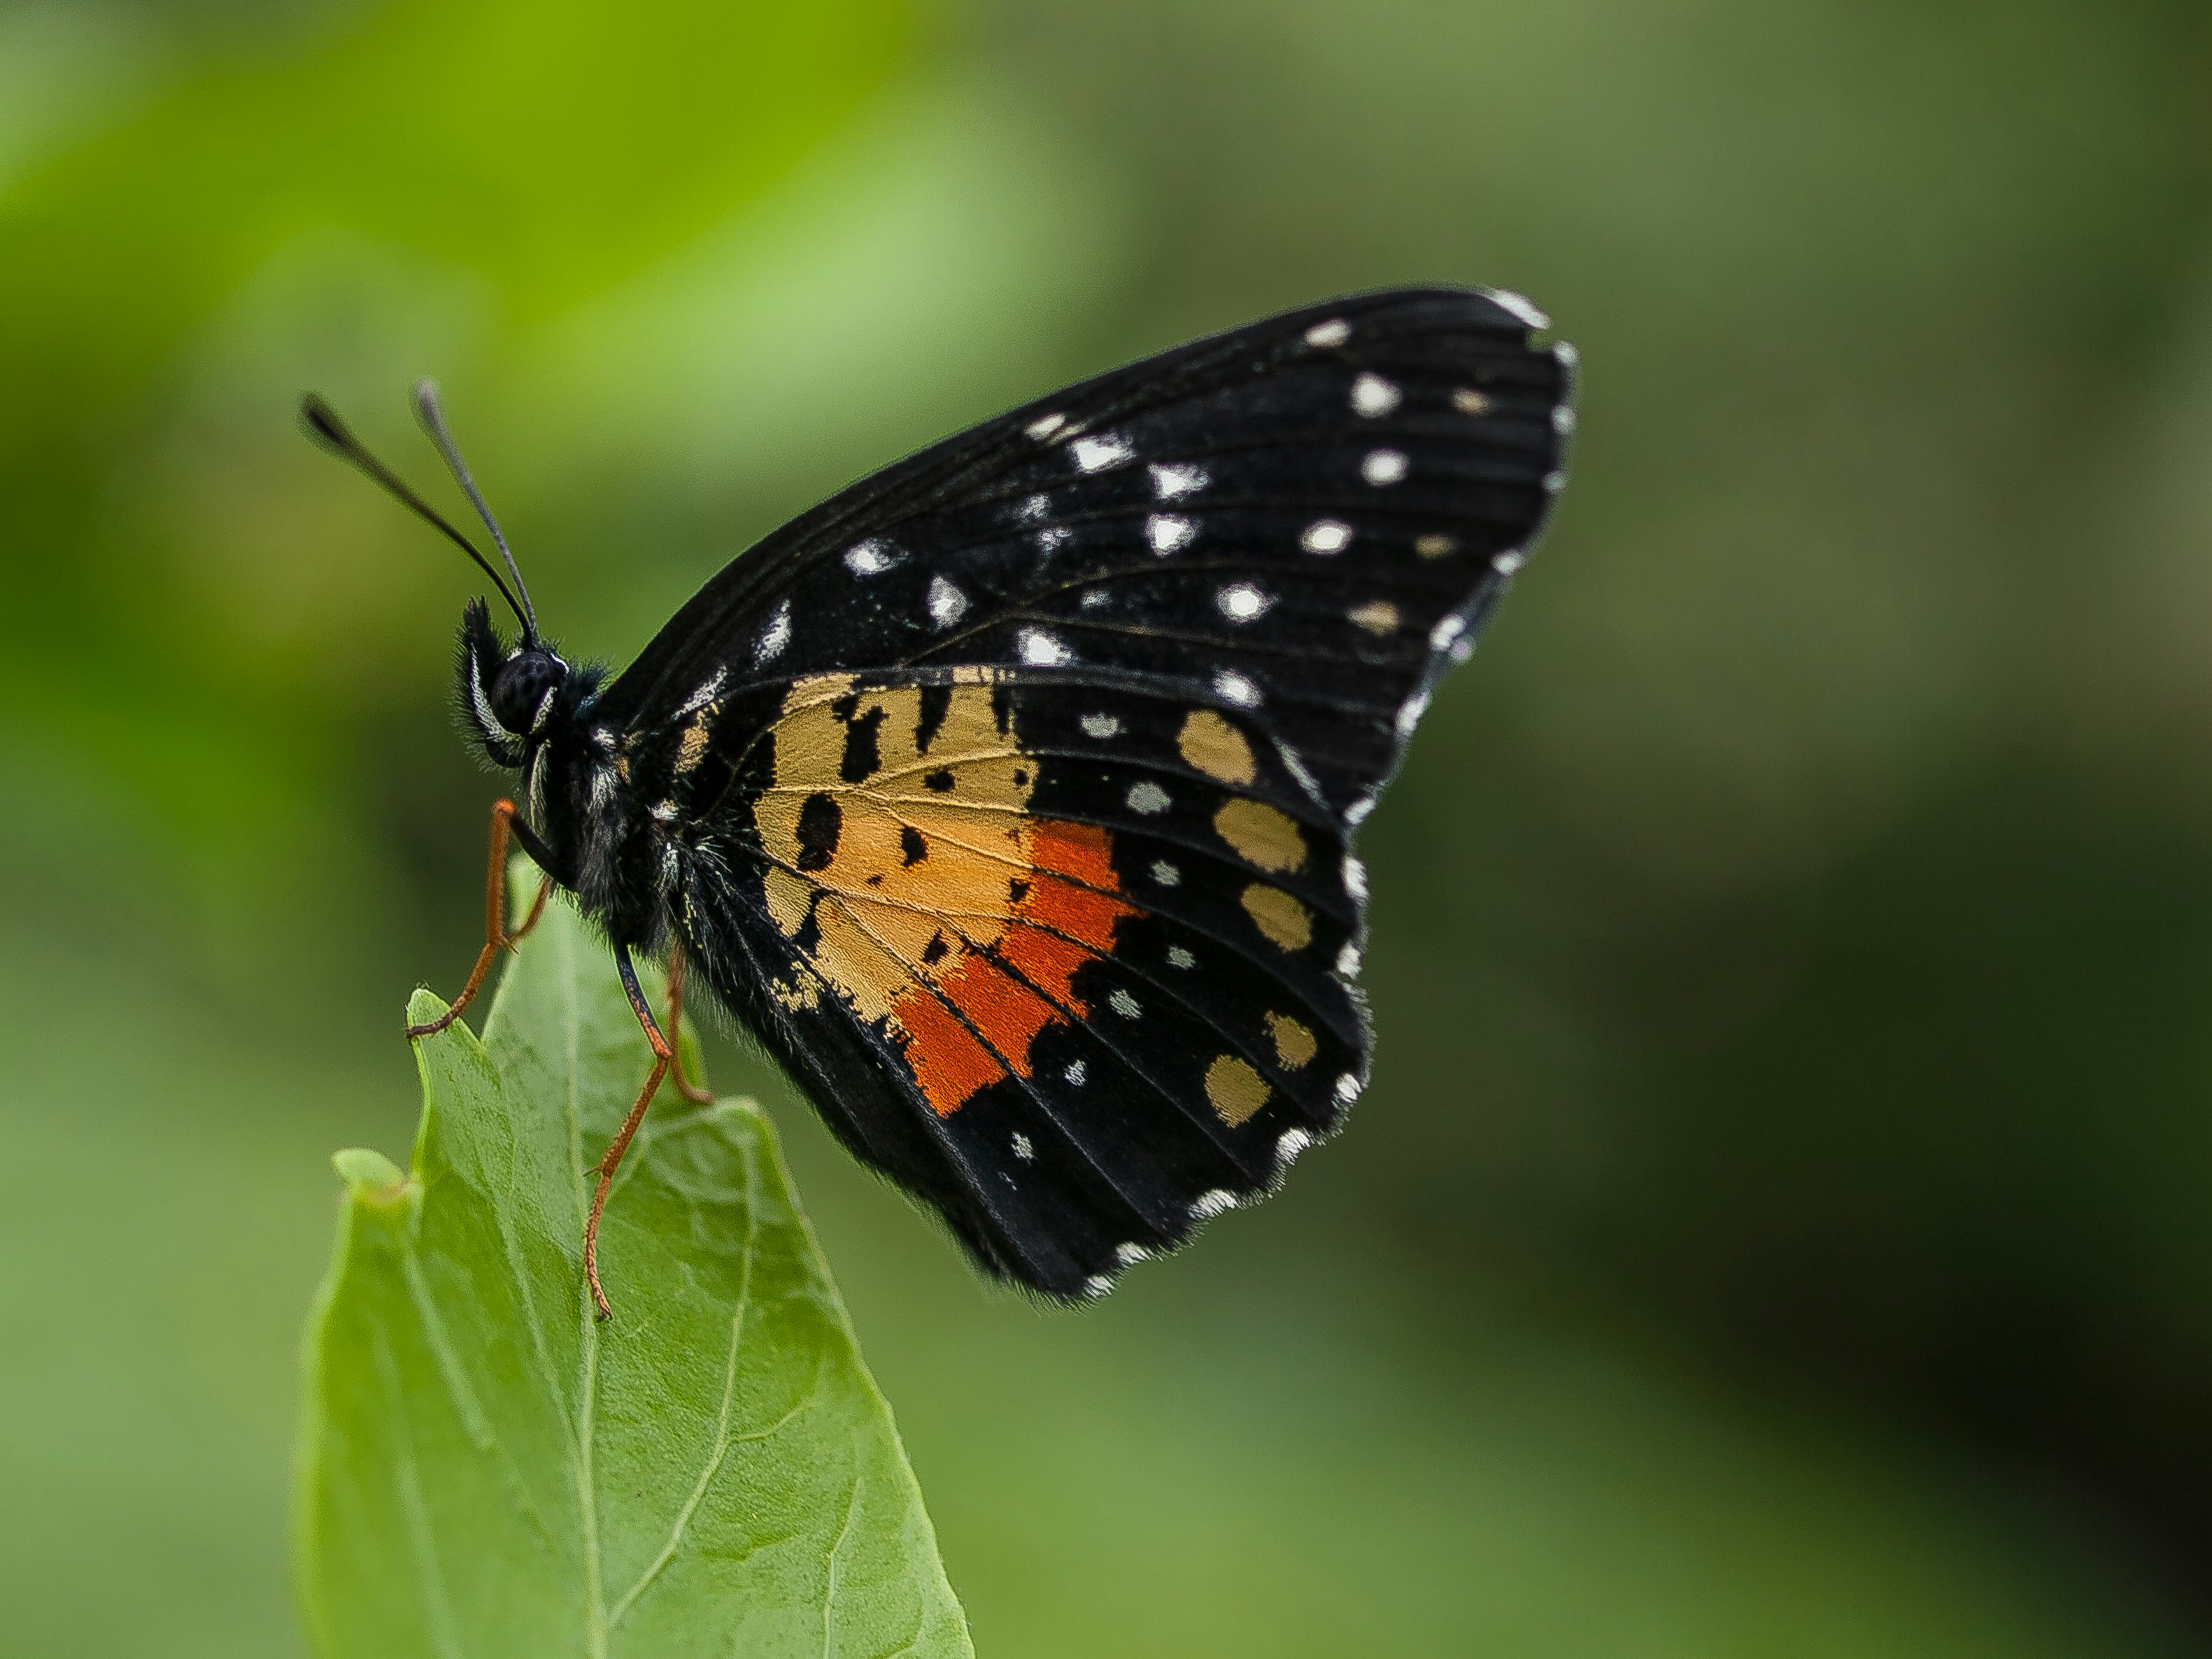 black and orange butterfly perched on green leaf during daytime